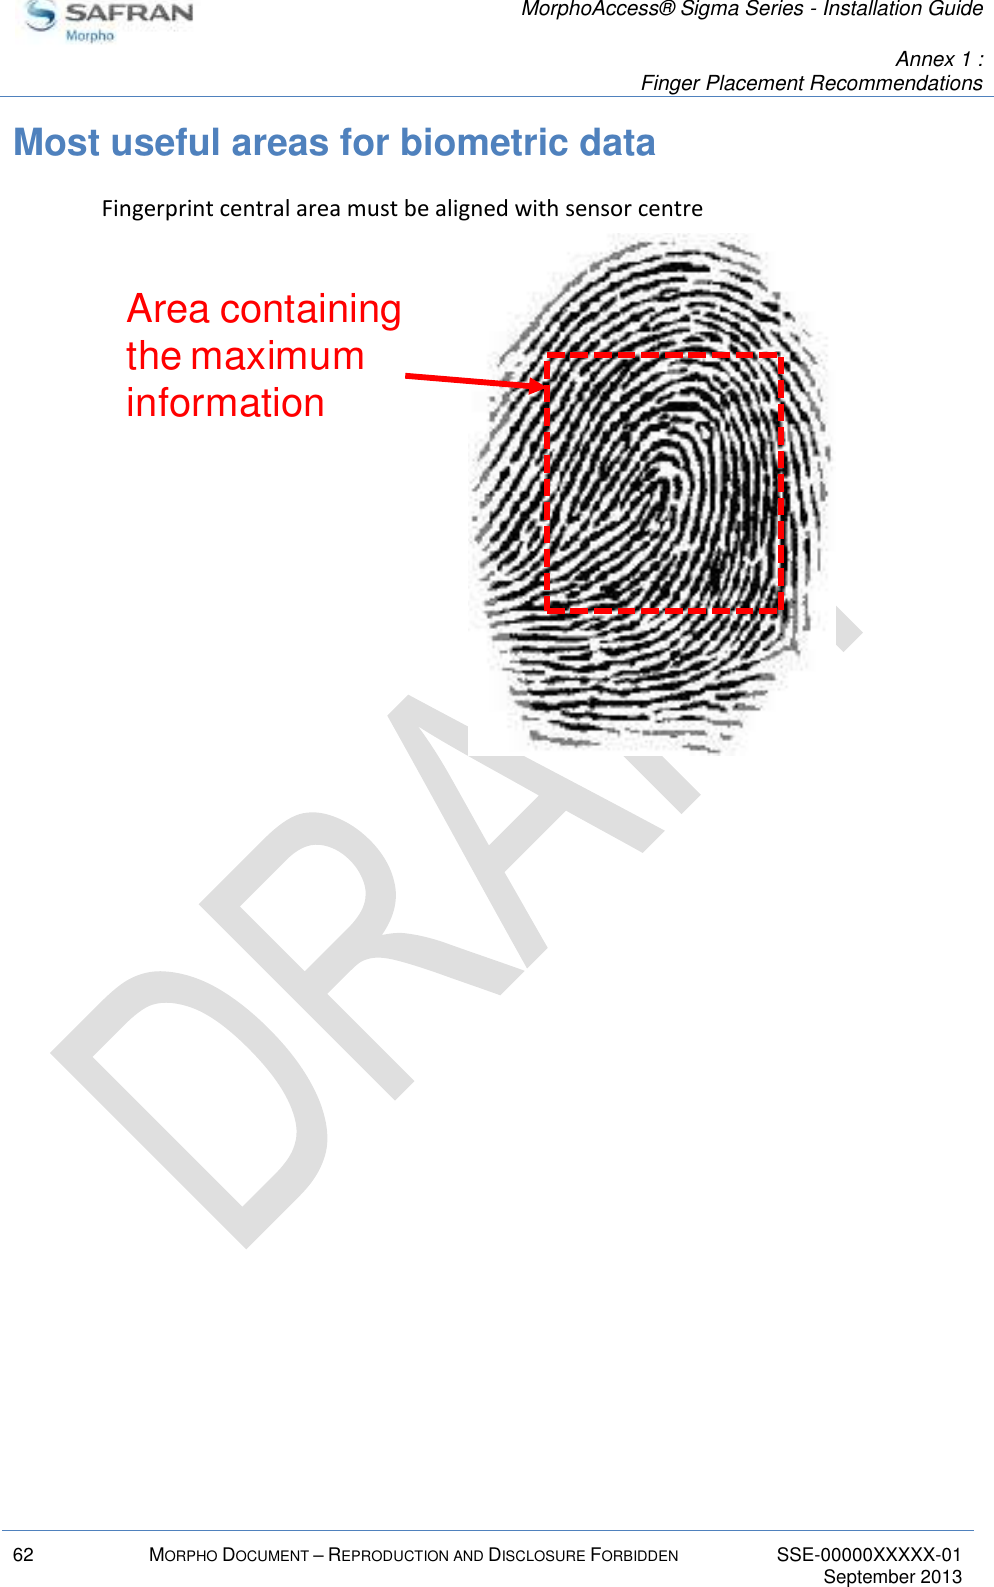   MorphoAccess® Sigma Series - Installation Guide   Annex 1 :  Finger Placement Recommendations  62 MORPHO DOCUMENT – REPRODUCTION AND DISCLOSURE FORBIDDEN SSE-00000XXXXX-01   September 2013  Most useful areas for biometric data Fingerprint central area must be aligned with sensor centre  Area containing the maximum information